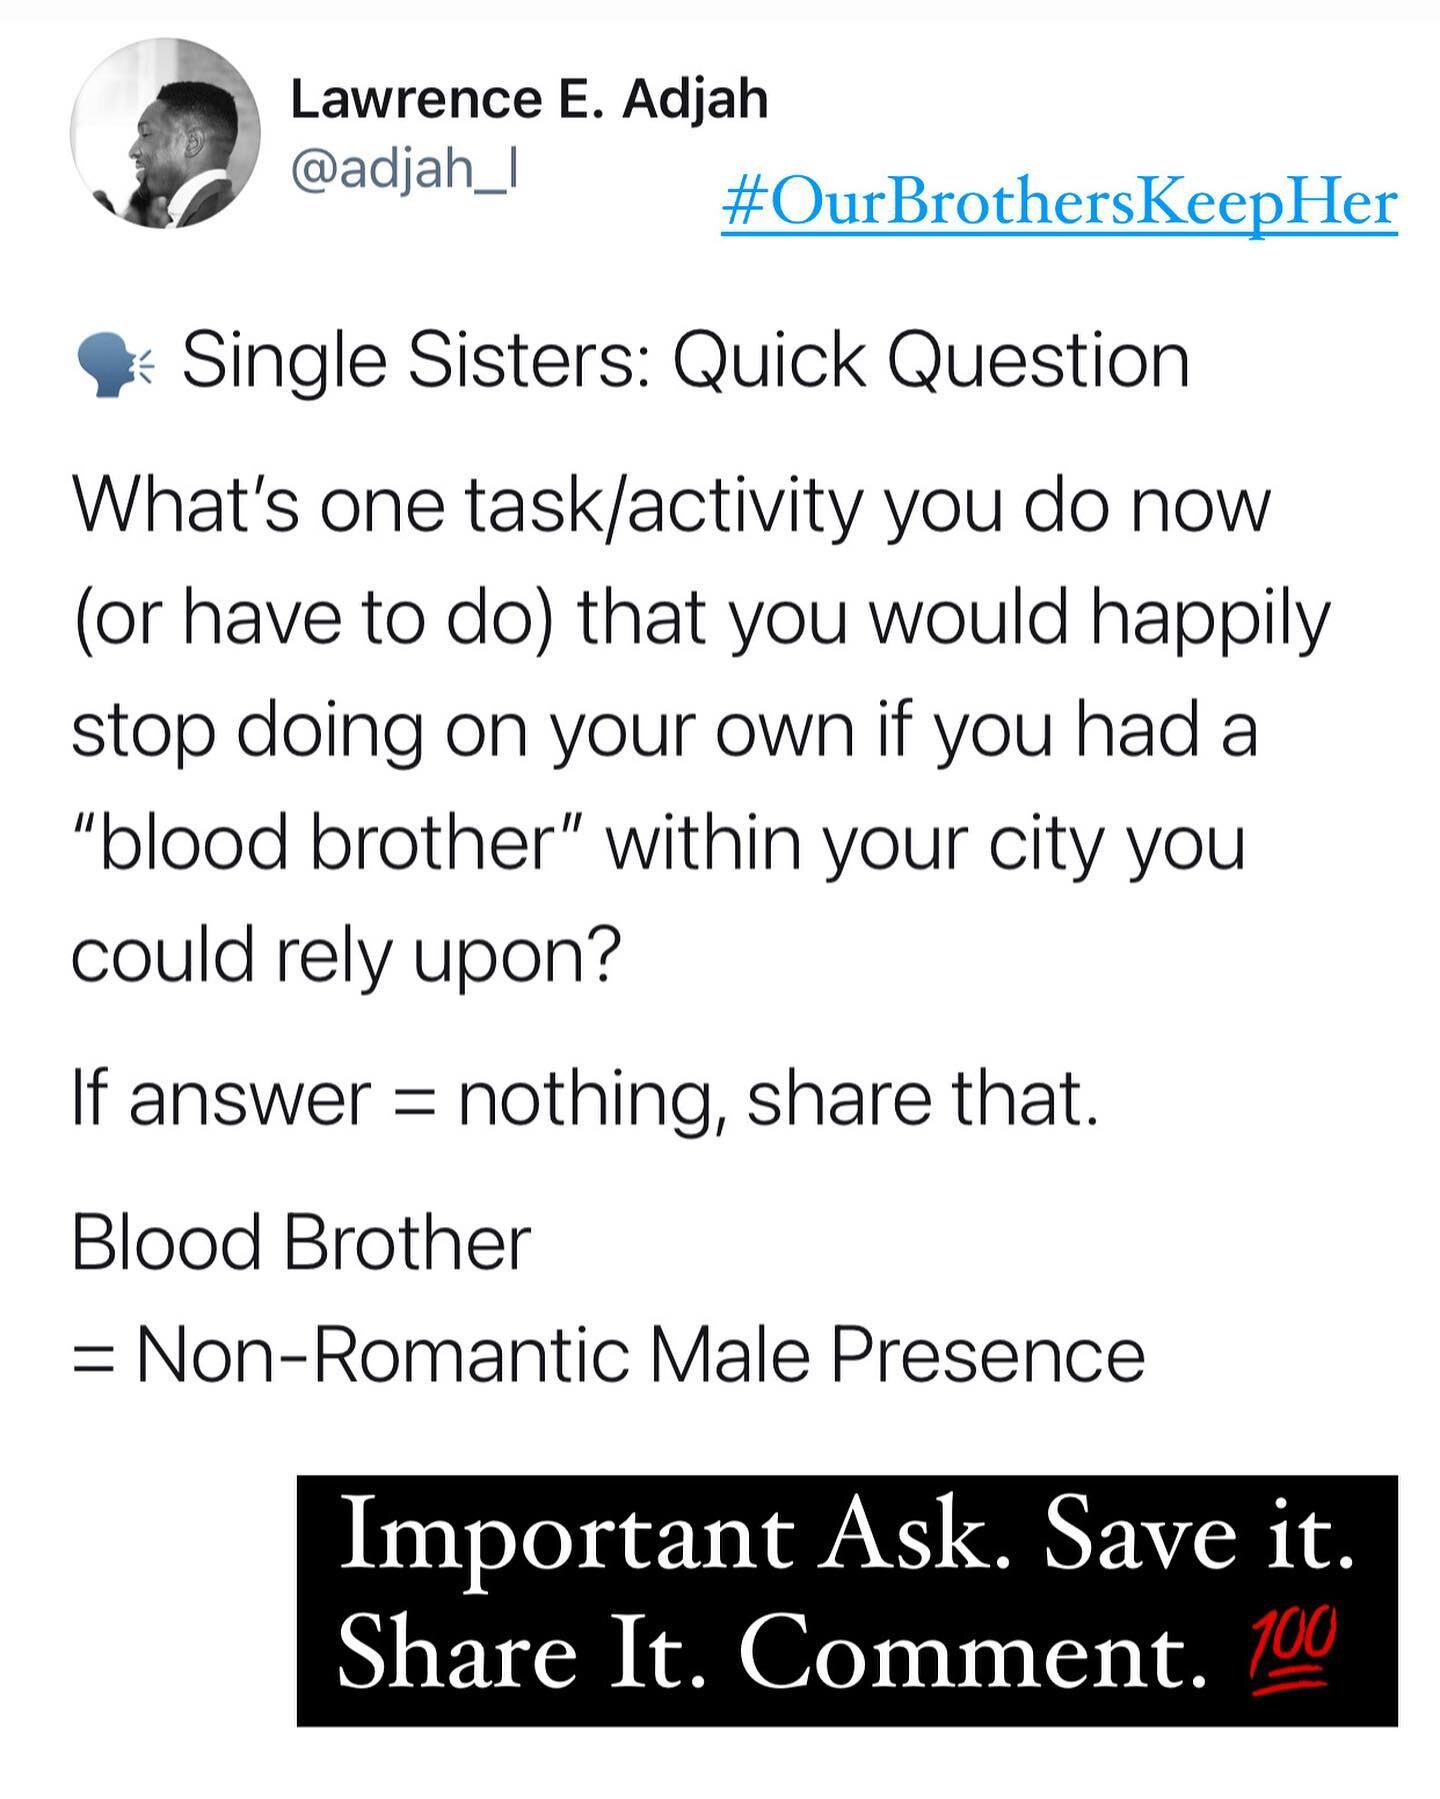 🗣 Single Sisters: What&rsquo;s one thing?

We&rsquo;ve been at work and testing out some assumptions mow.

Seeing something. 

Seriously, what&rsquo;s one thing? What would you need us for? (eg, Handy work, moving, simple presence, protection? Nothi